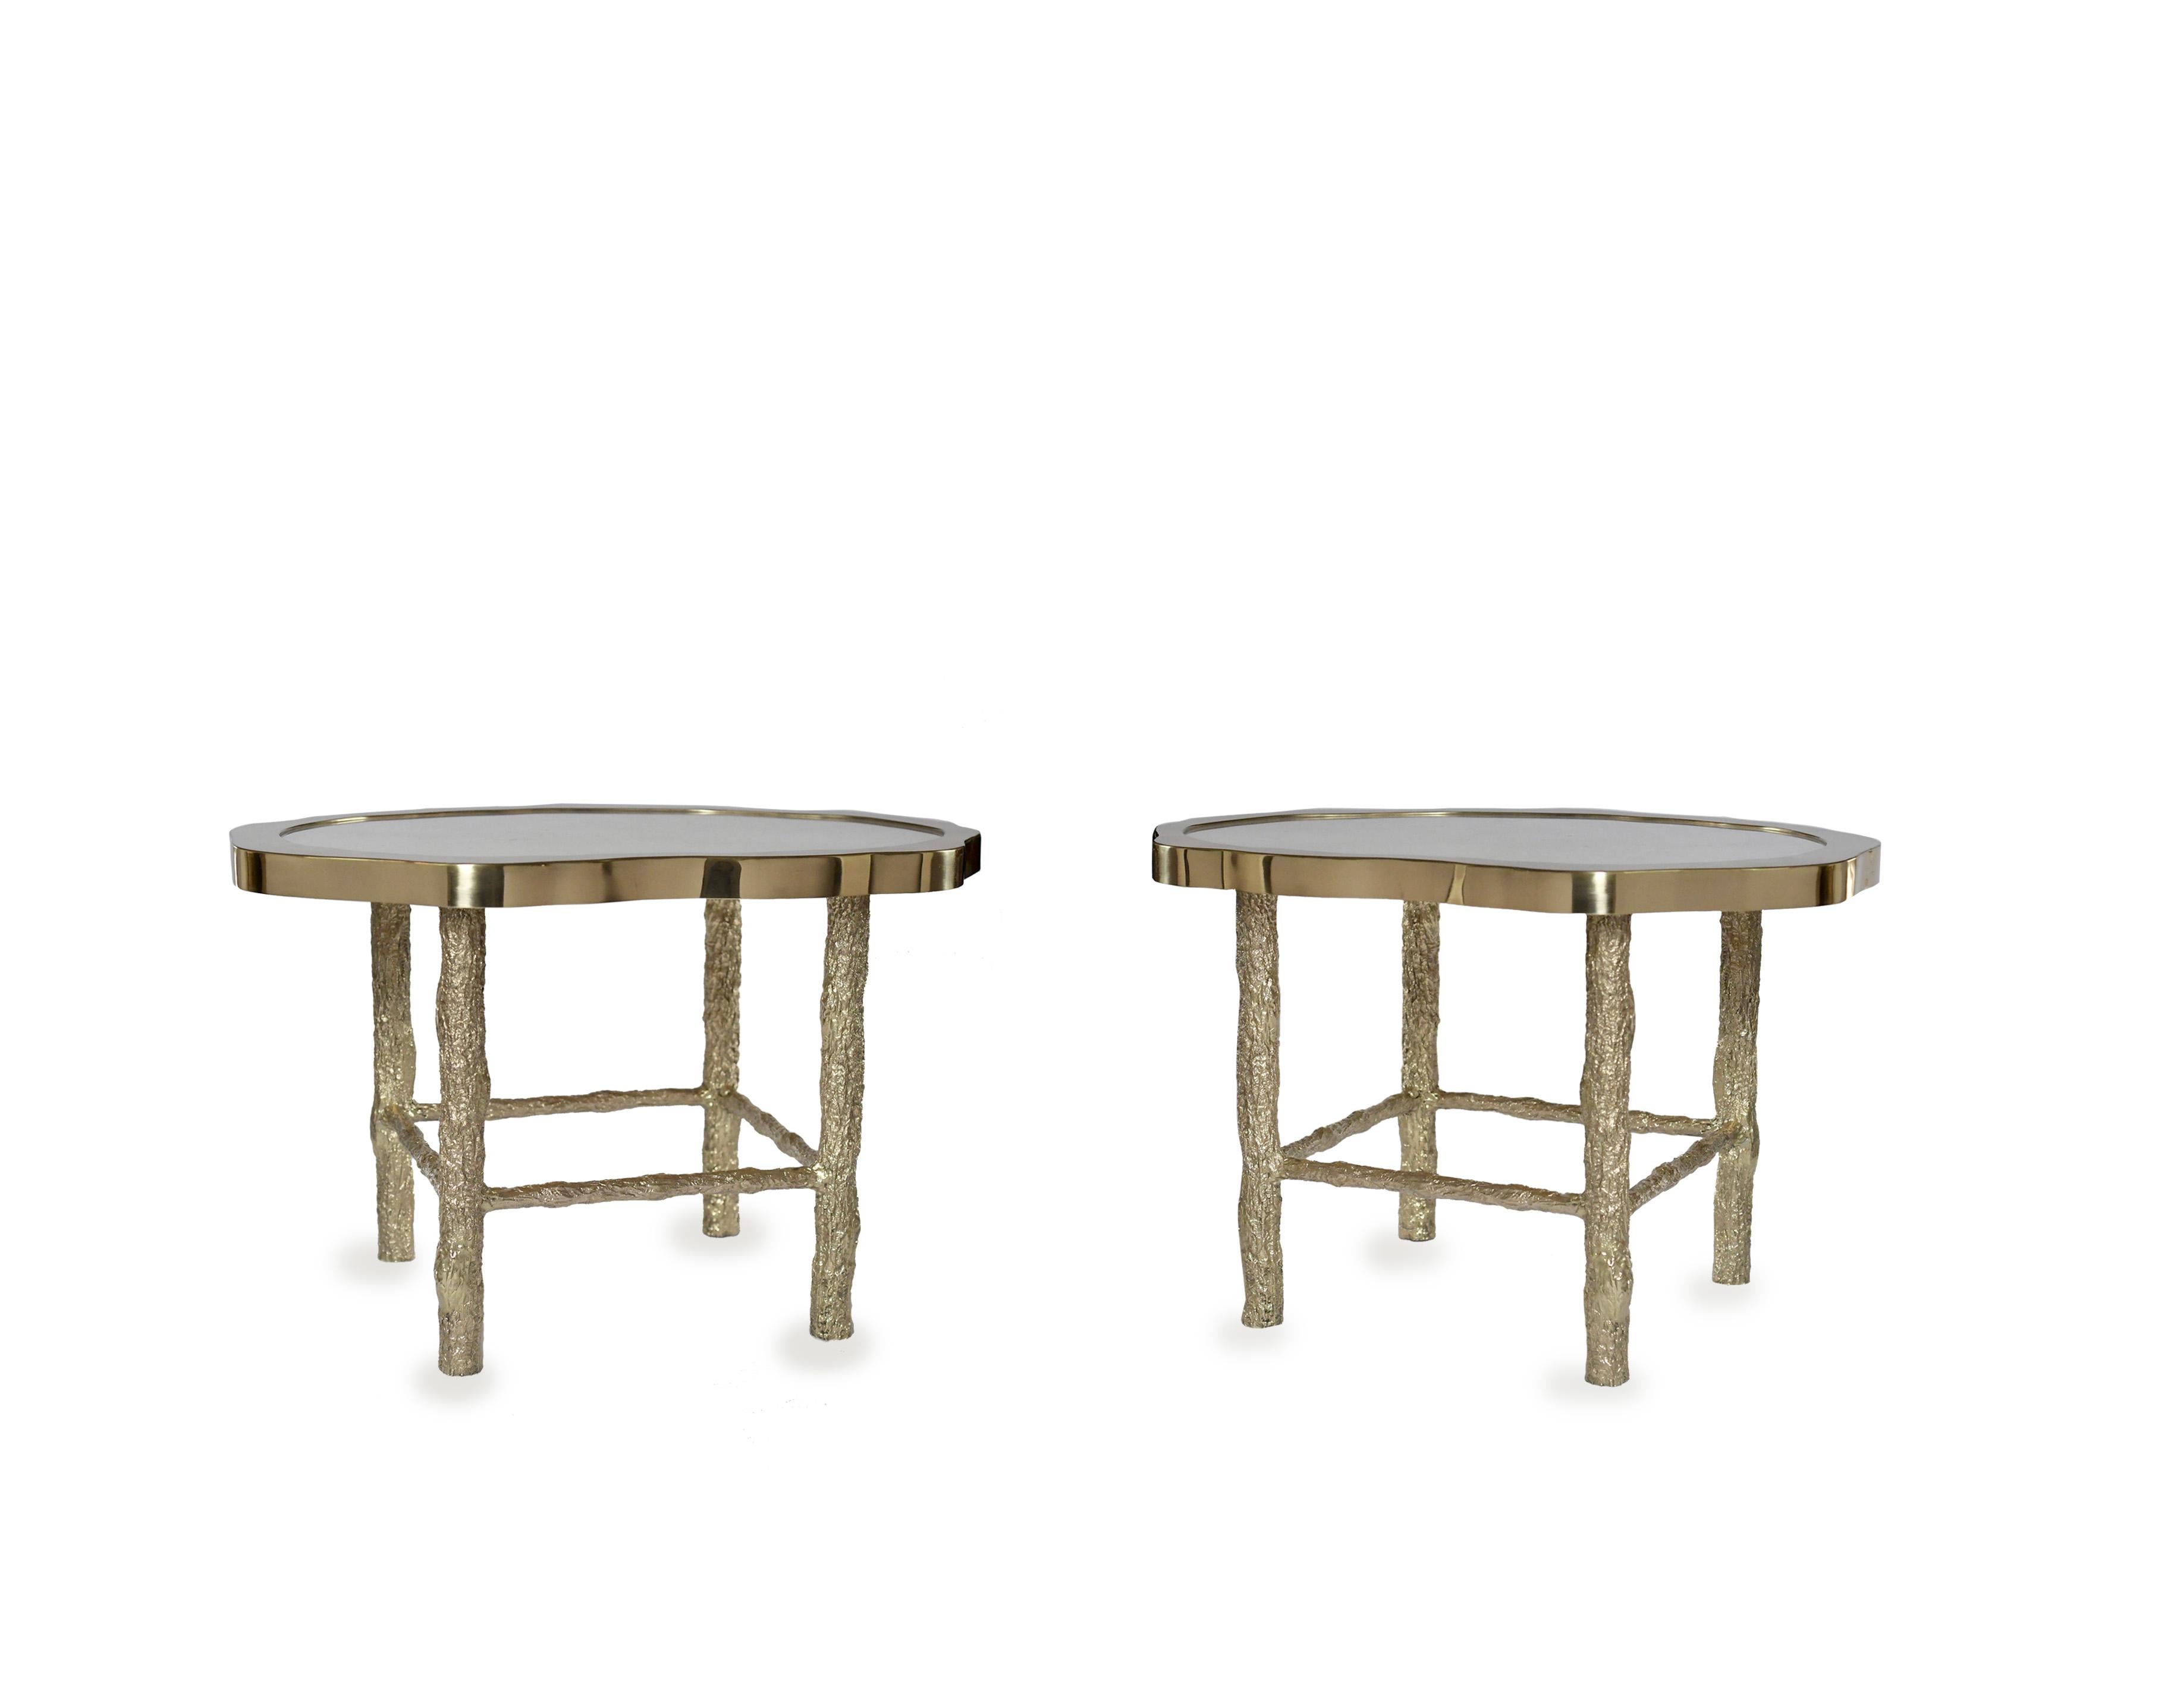 Pair of rock crystal quartz cocktail tables with twig inspired hammered brass legs, created by Phoenix Gallery.
Custom size upon request